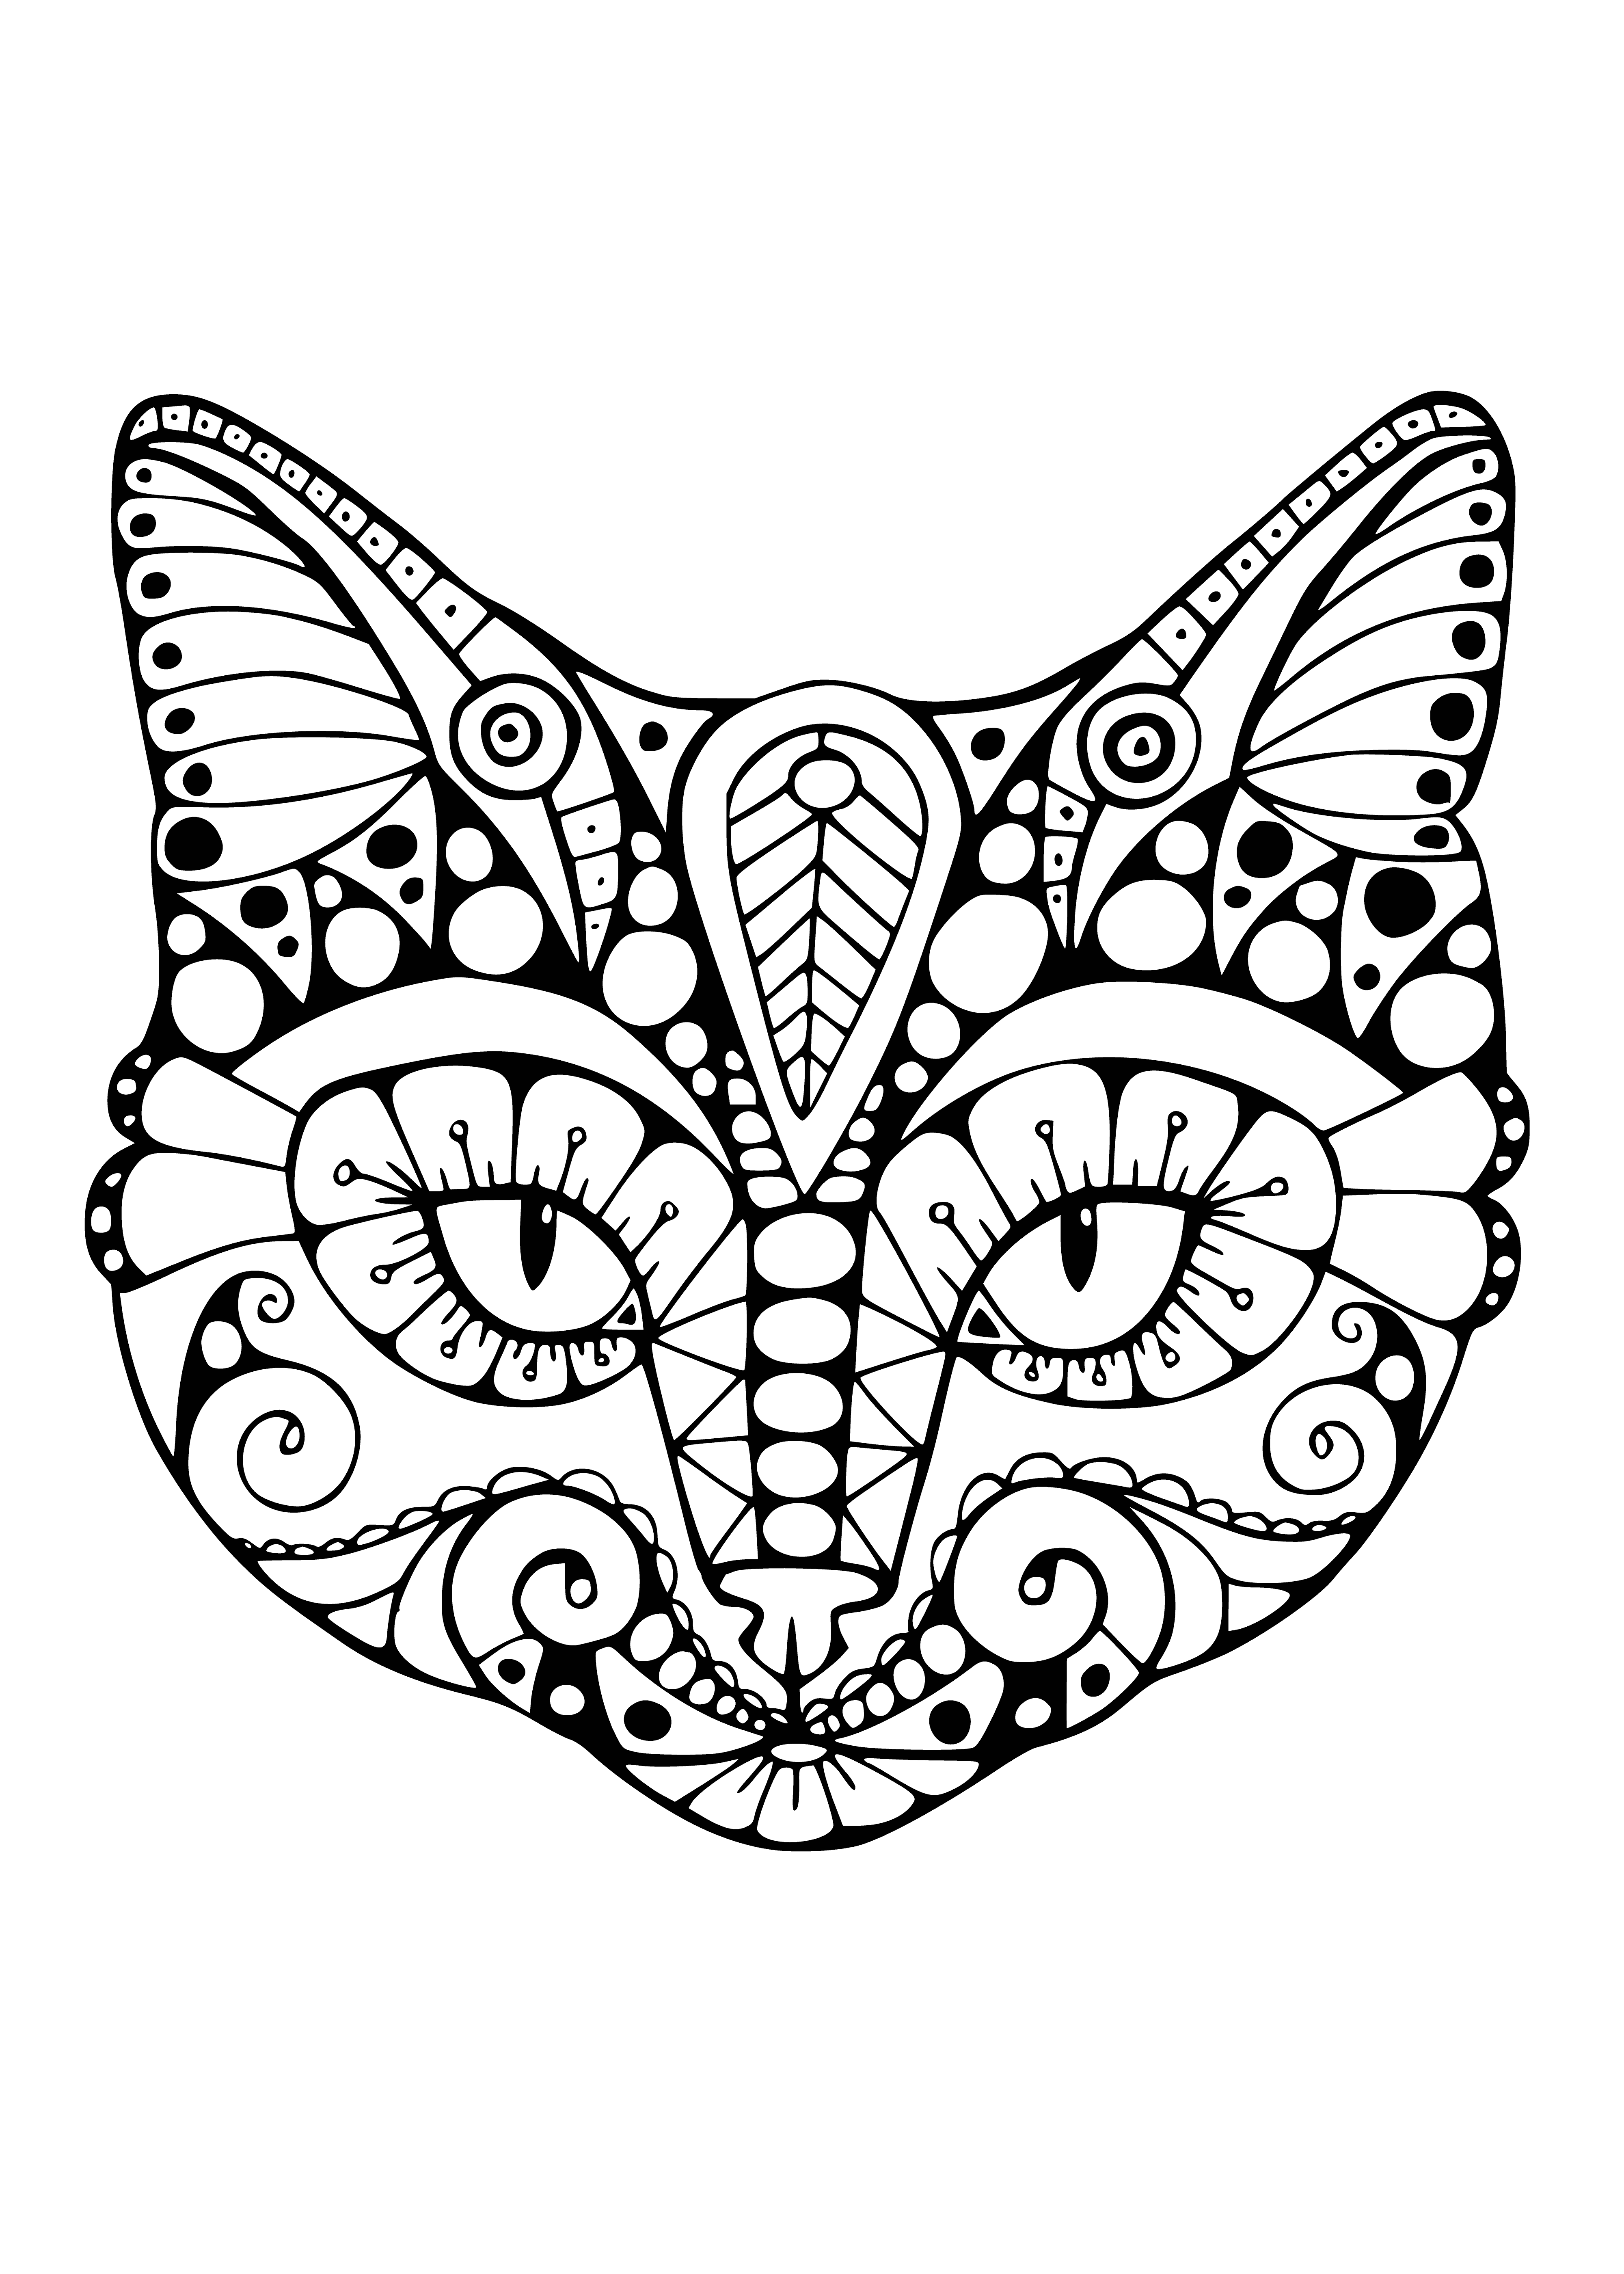 coloring page: Cute and relaxing cats coloring pages show cats in various situations, from perching atop books to meditating and playing with yarn. Enjoyable to color in!